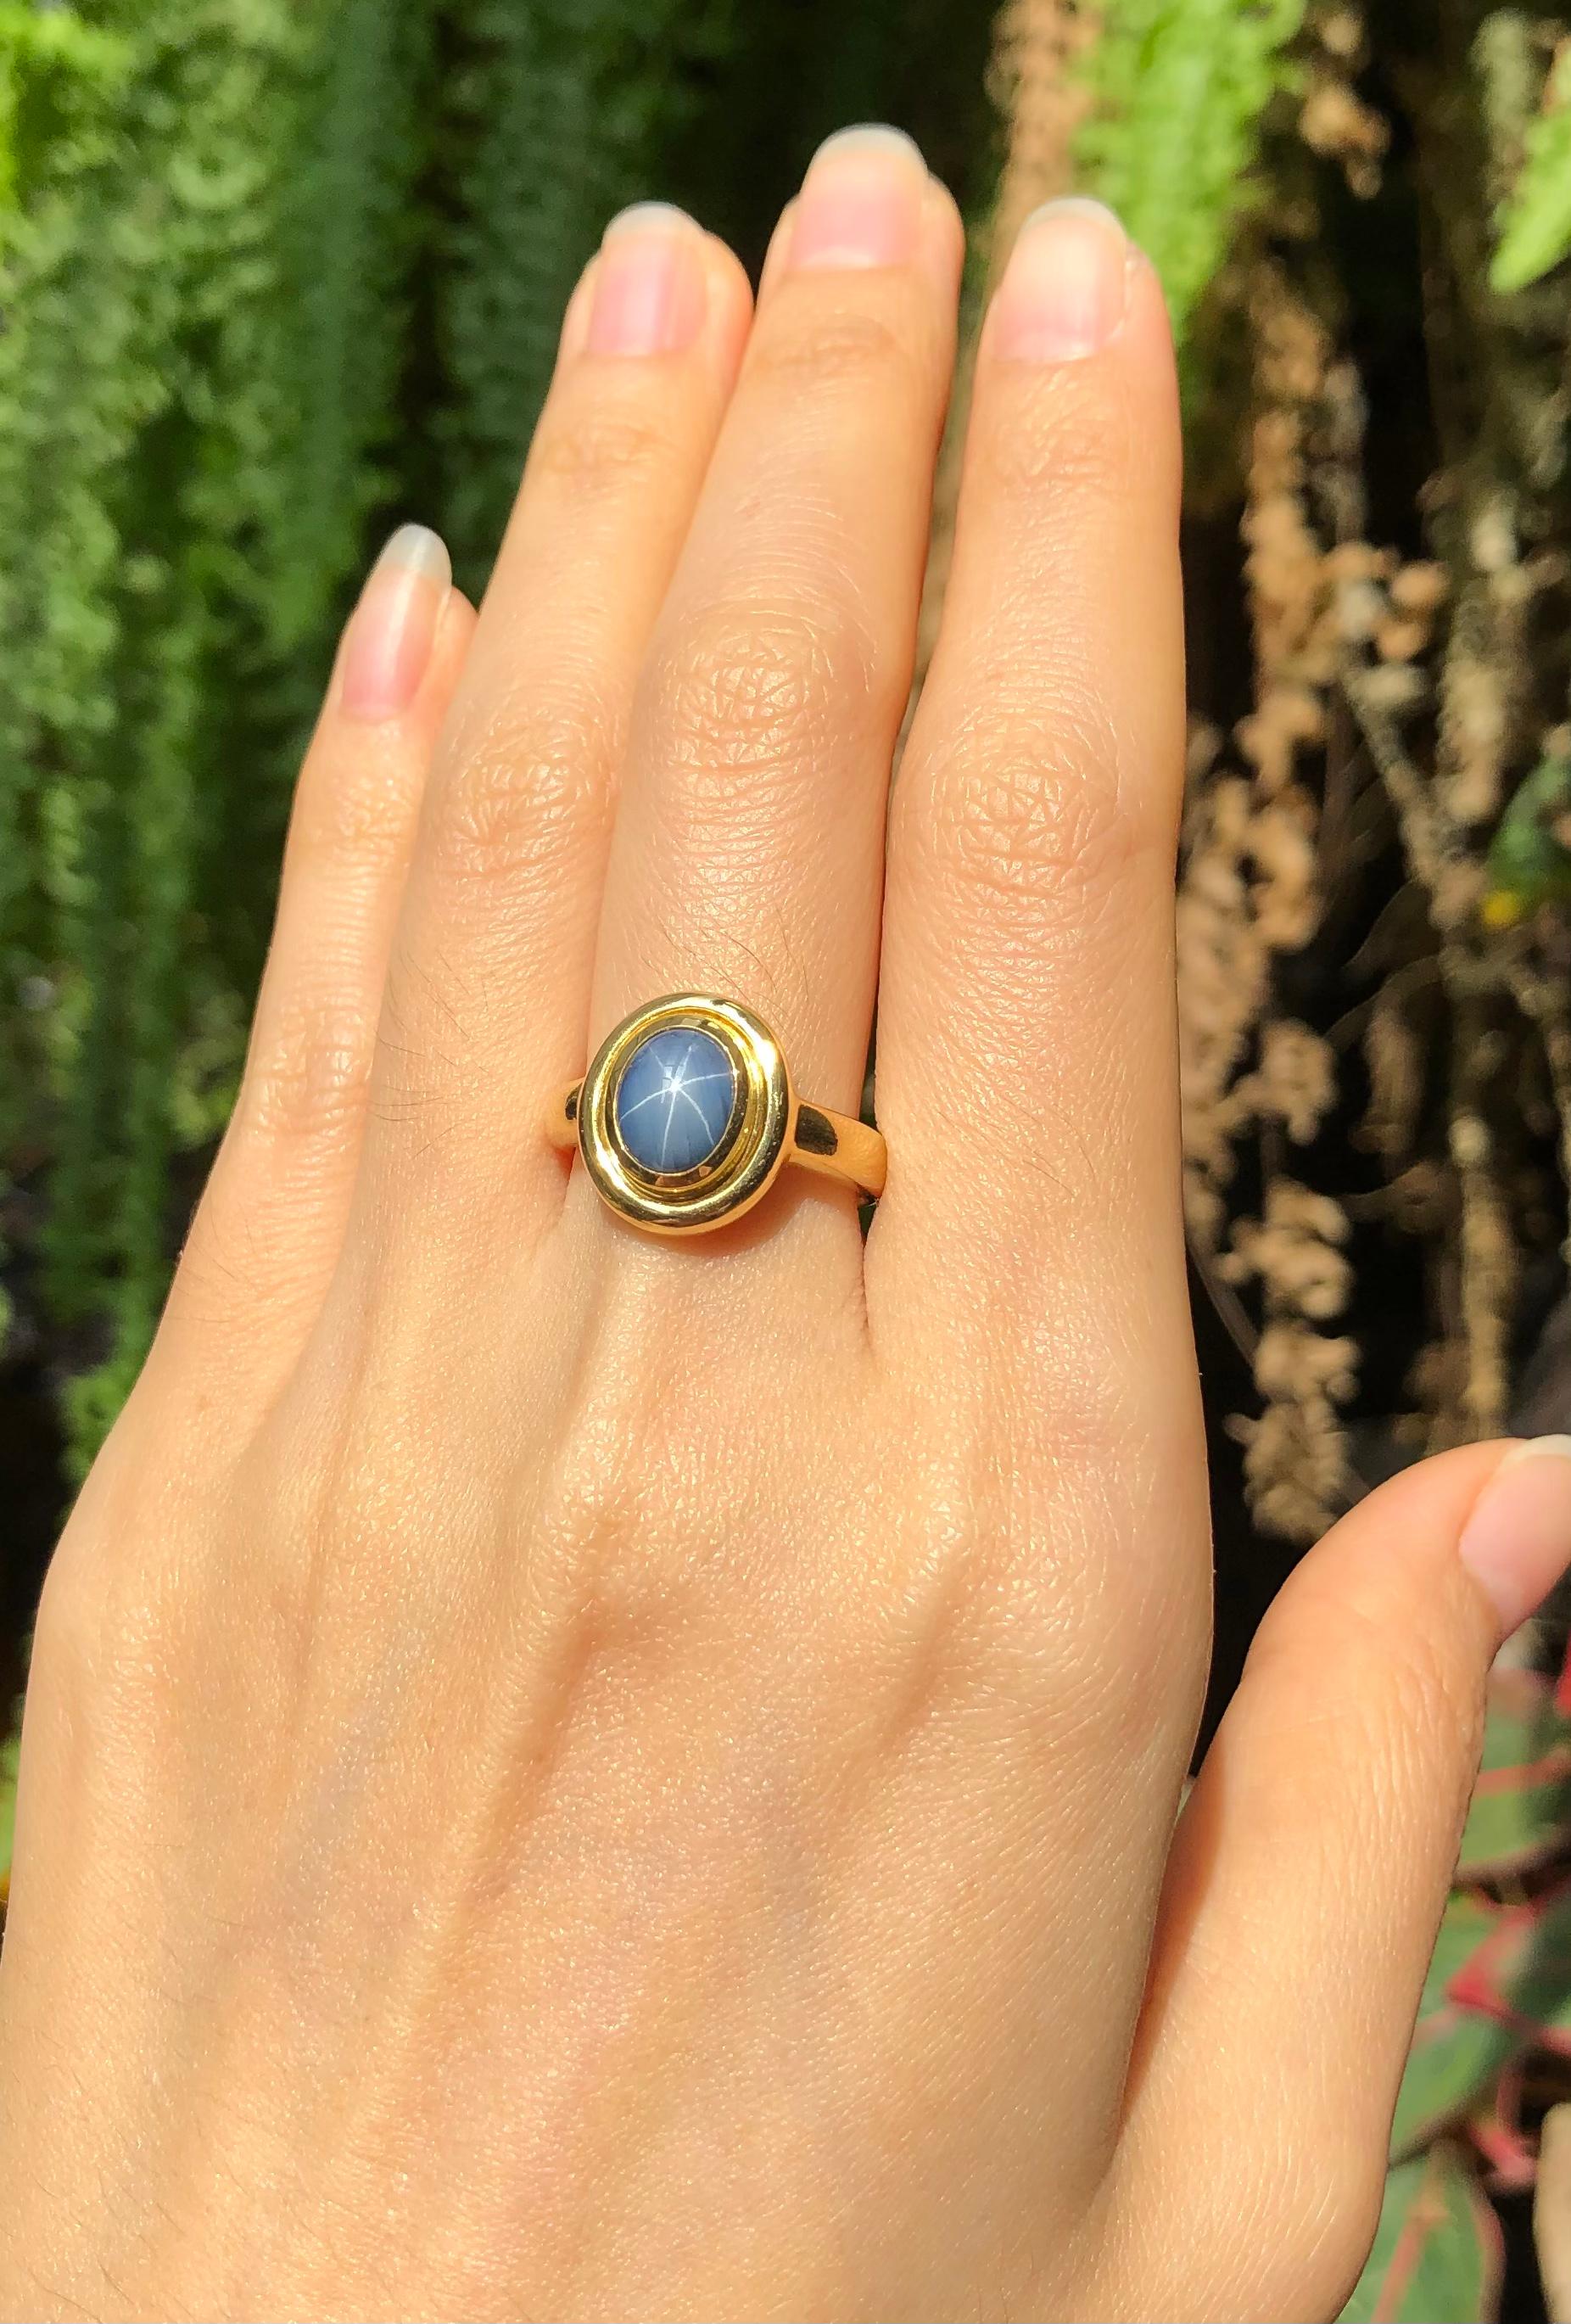 Blue Star Sapphire 2.38 carats Ring set in 18 Karat Gold Settings

Width:  1.1 cm 
Length: 1.4 cm
Ring Size: 54
Total Weight: 7.44 grams

